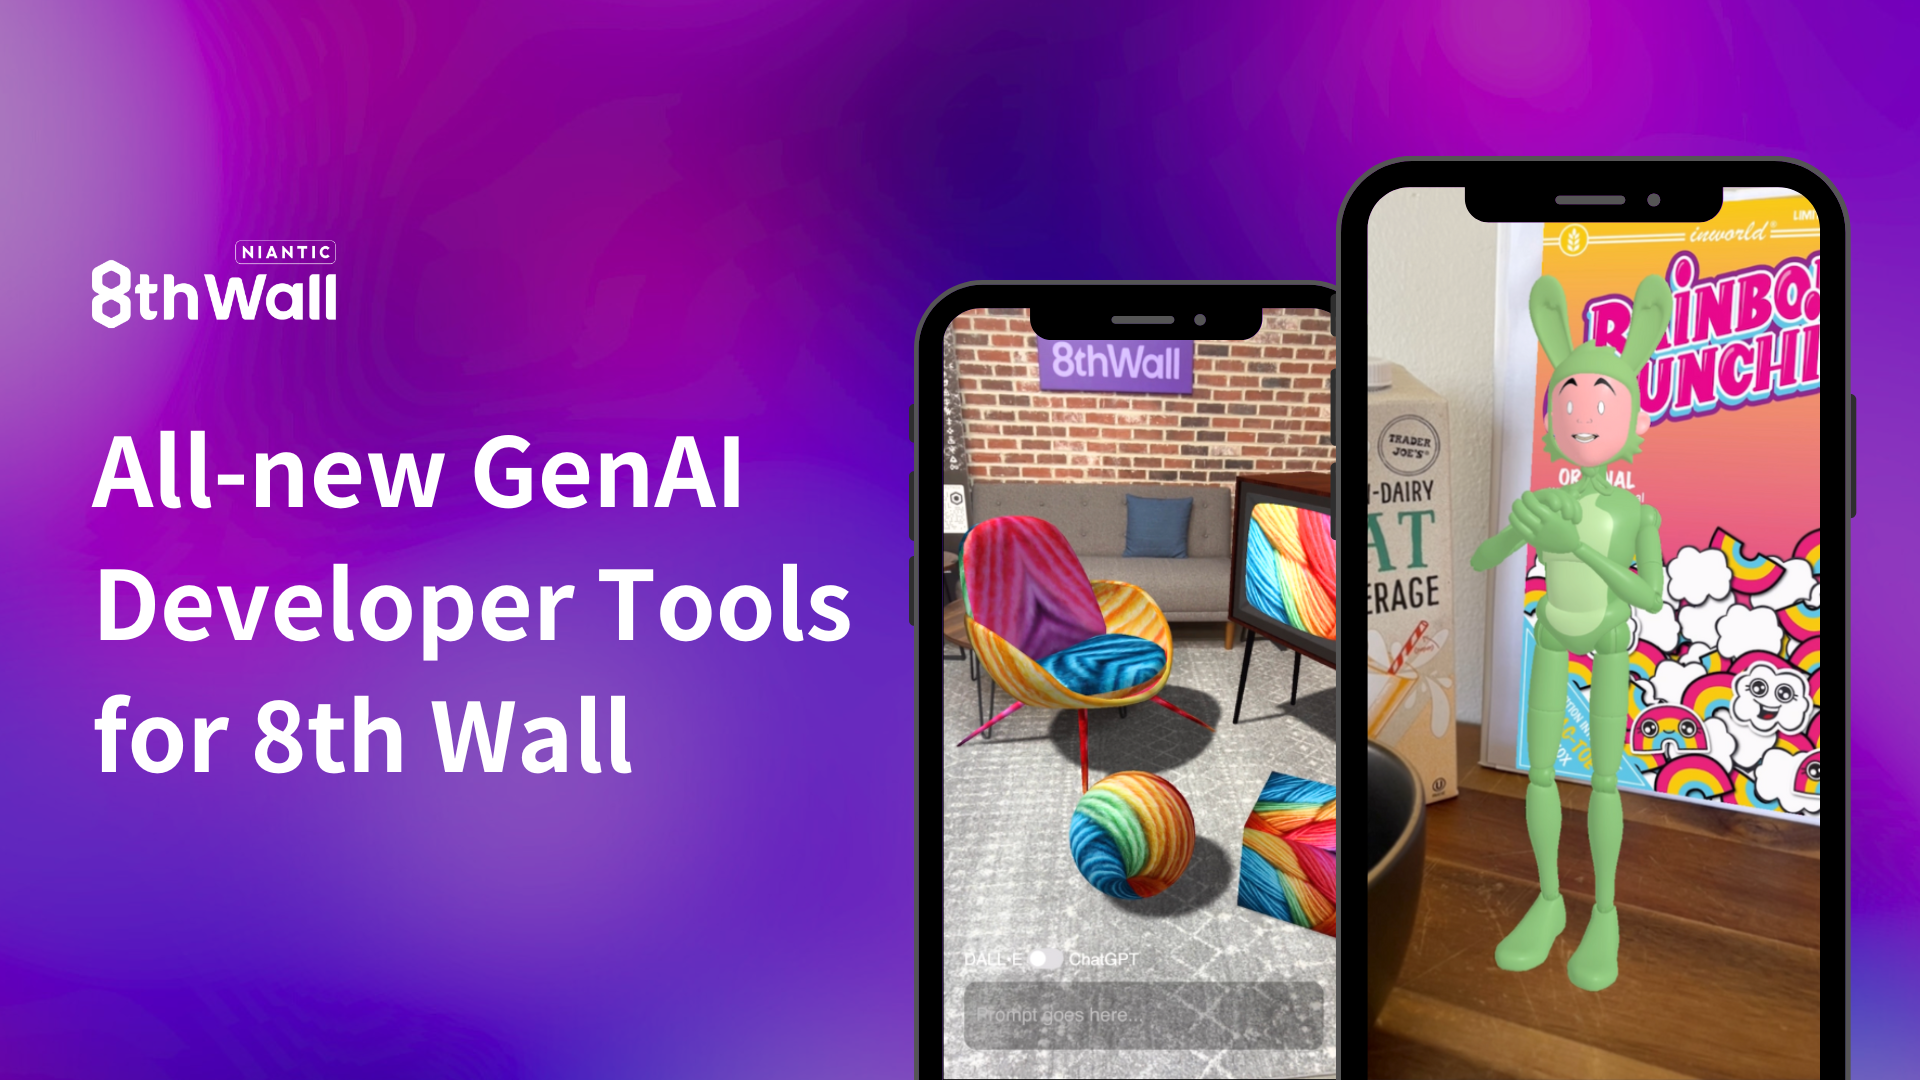 Unleash an all-new era of WebAR with Generative AI technology and 8th Wall